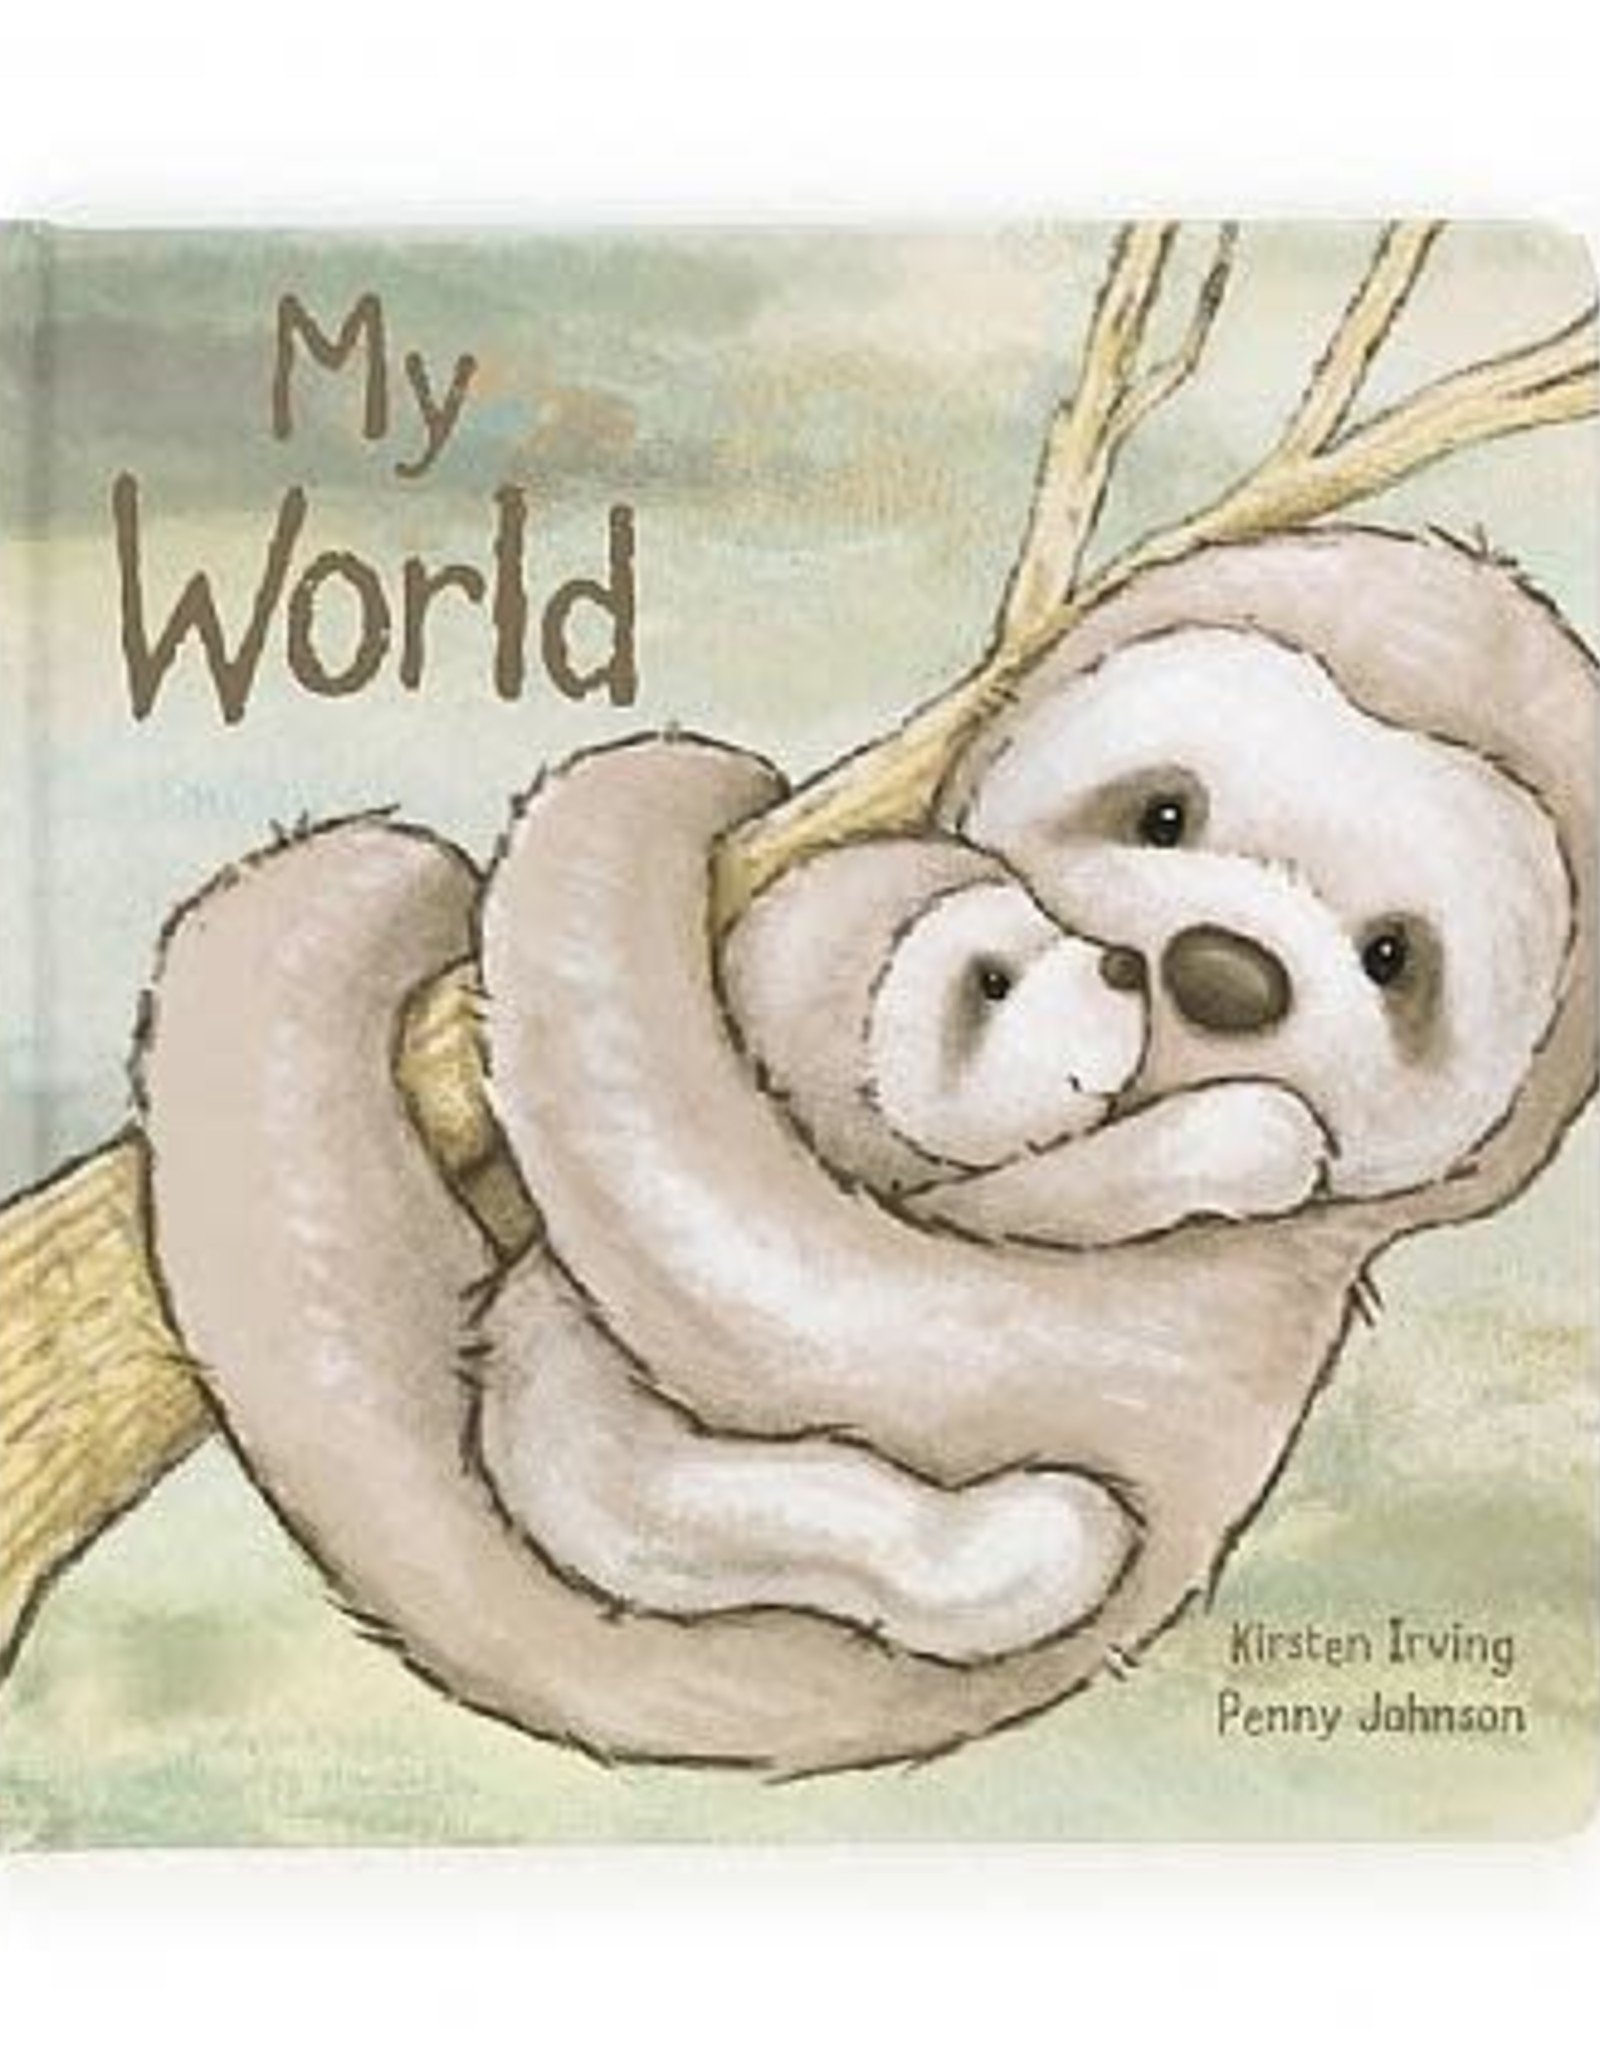 My World by Kirsten Irving and Penny Johnson